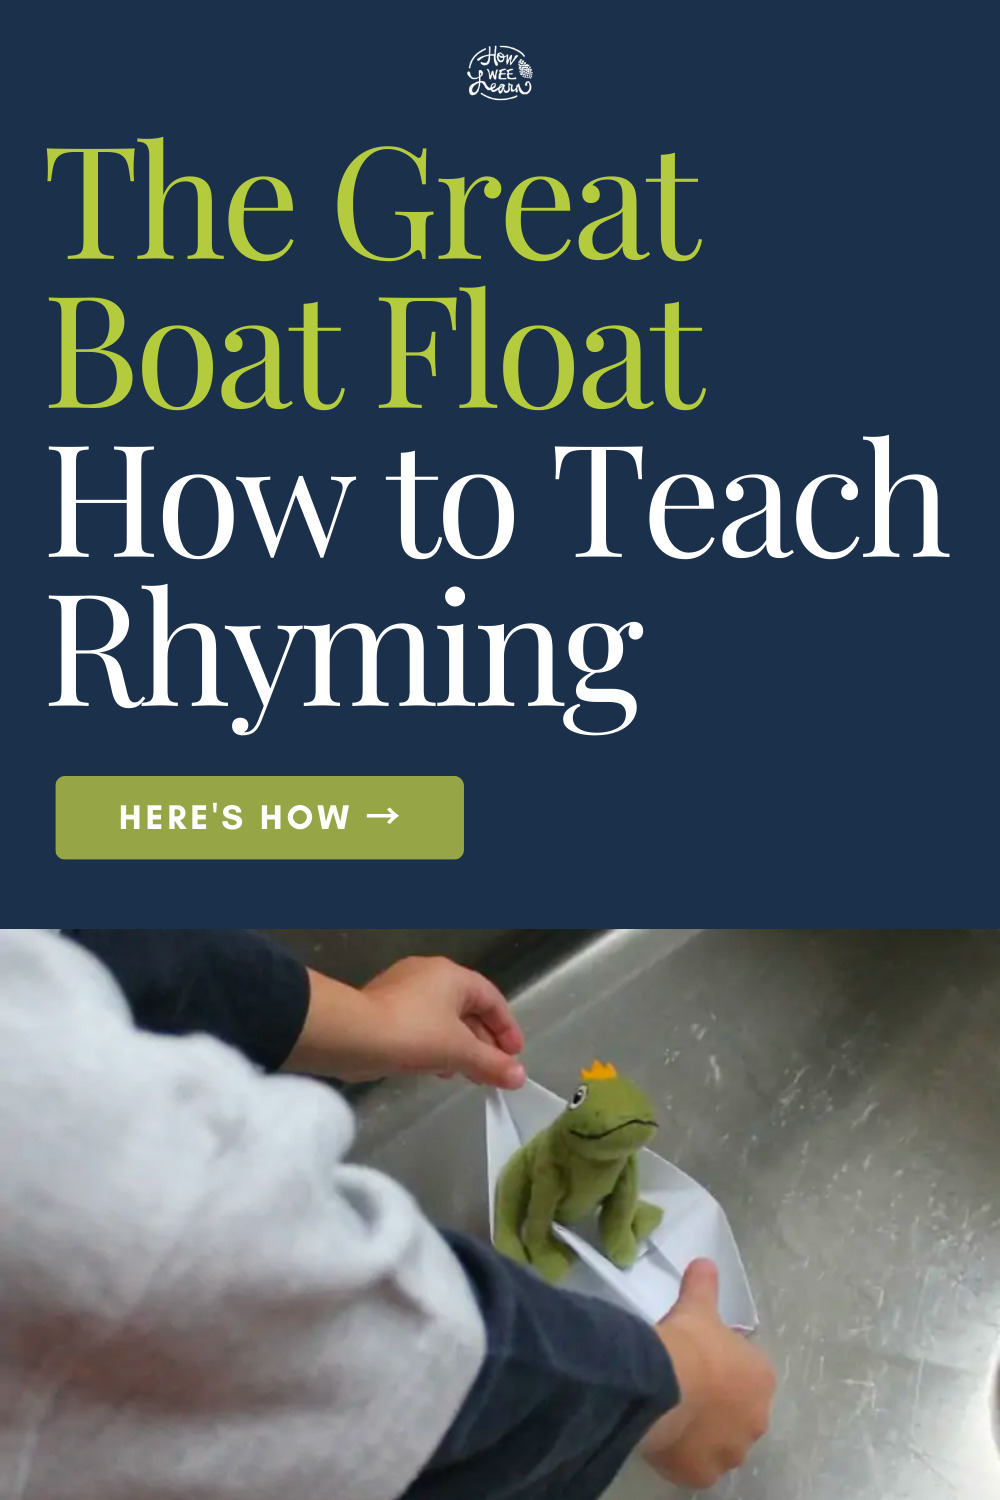 The Great Boat Float: How to Teach Rhyming